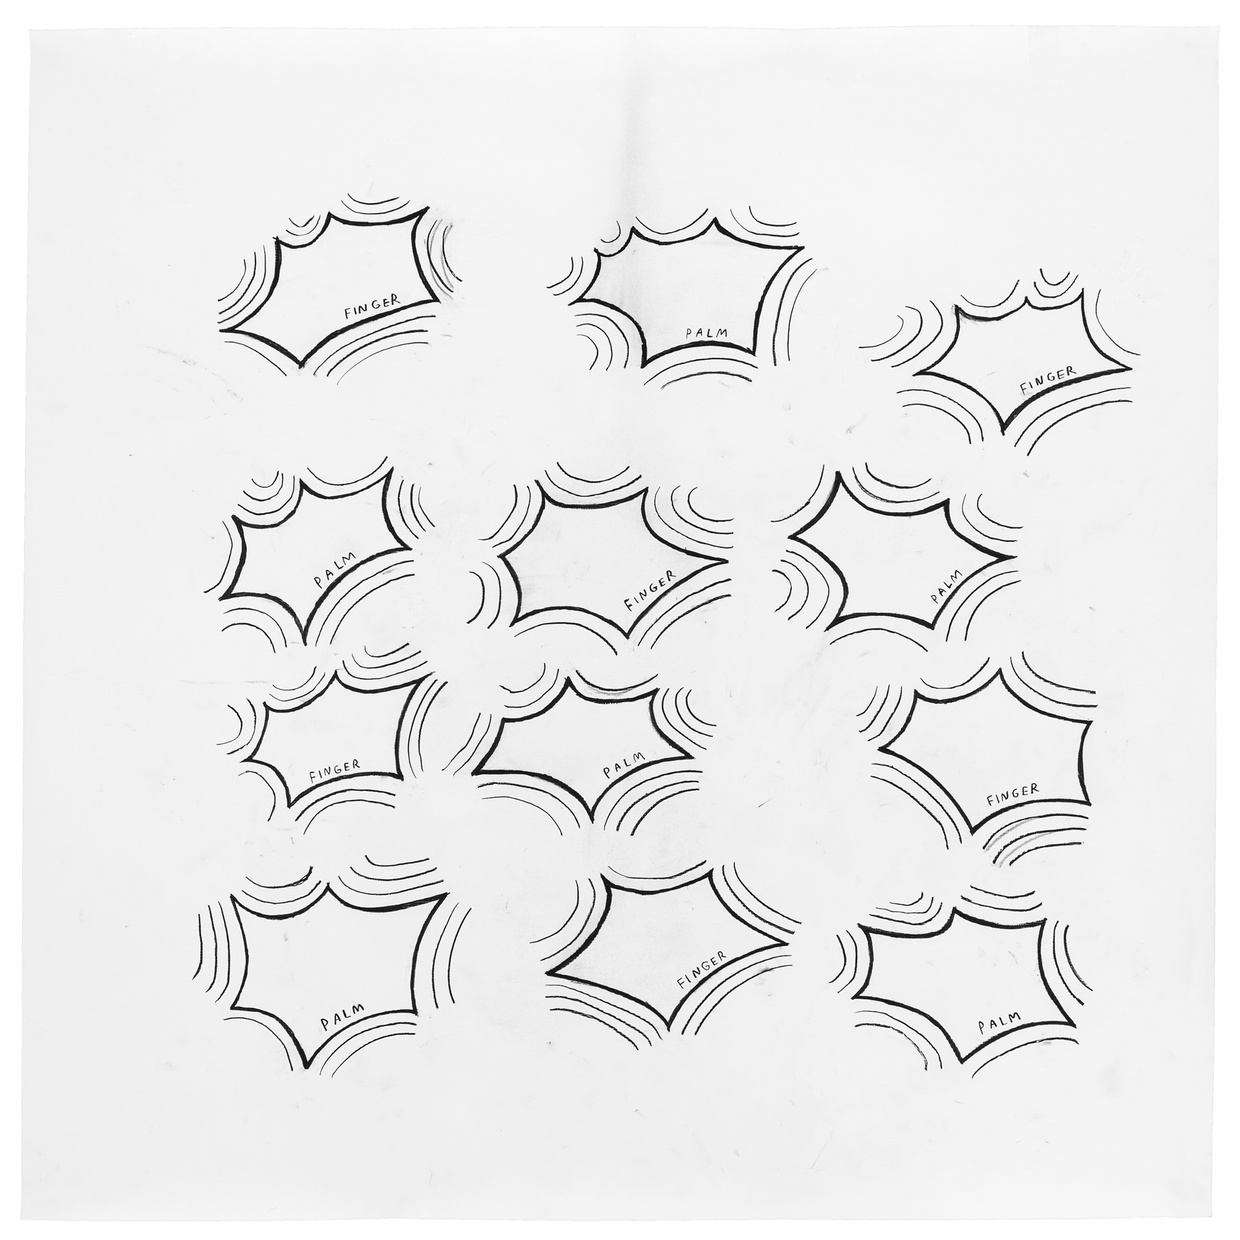 Drawing of twelve hexagons with curved sides, each with additional curved lines around them like waves emanating from them. Inside each one is either the word “palm” or the word “finger.”